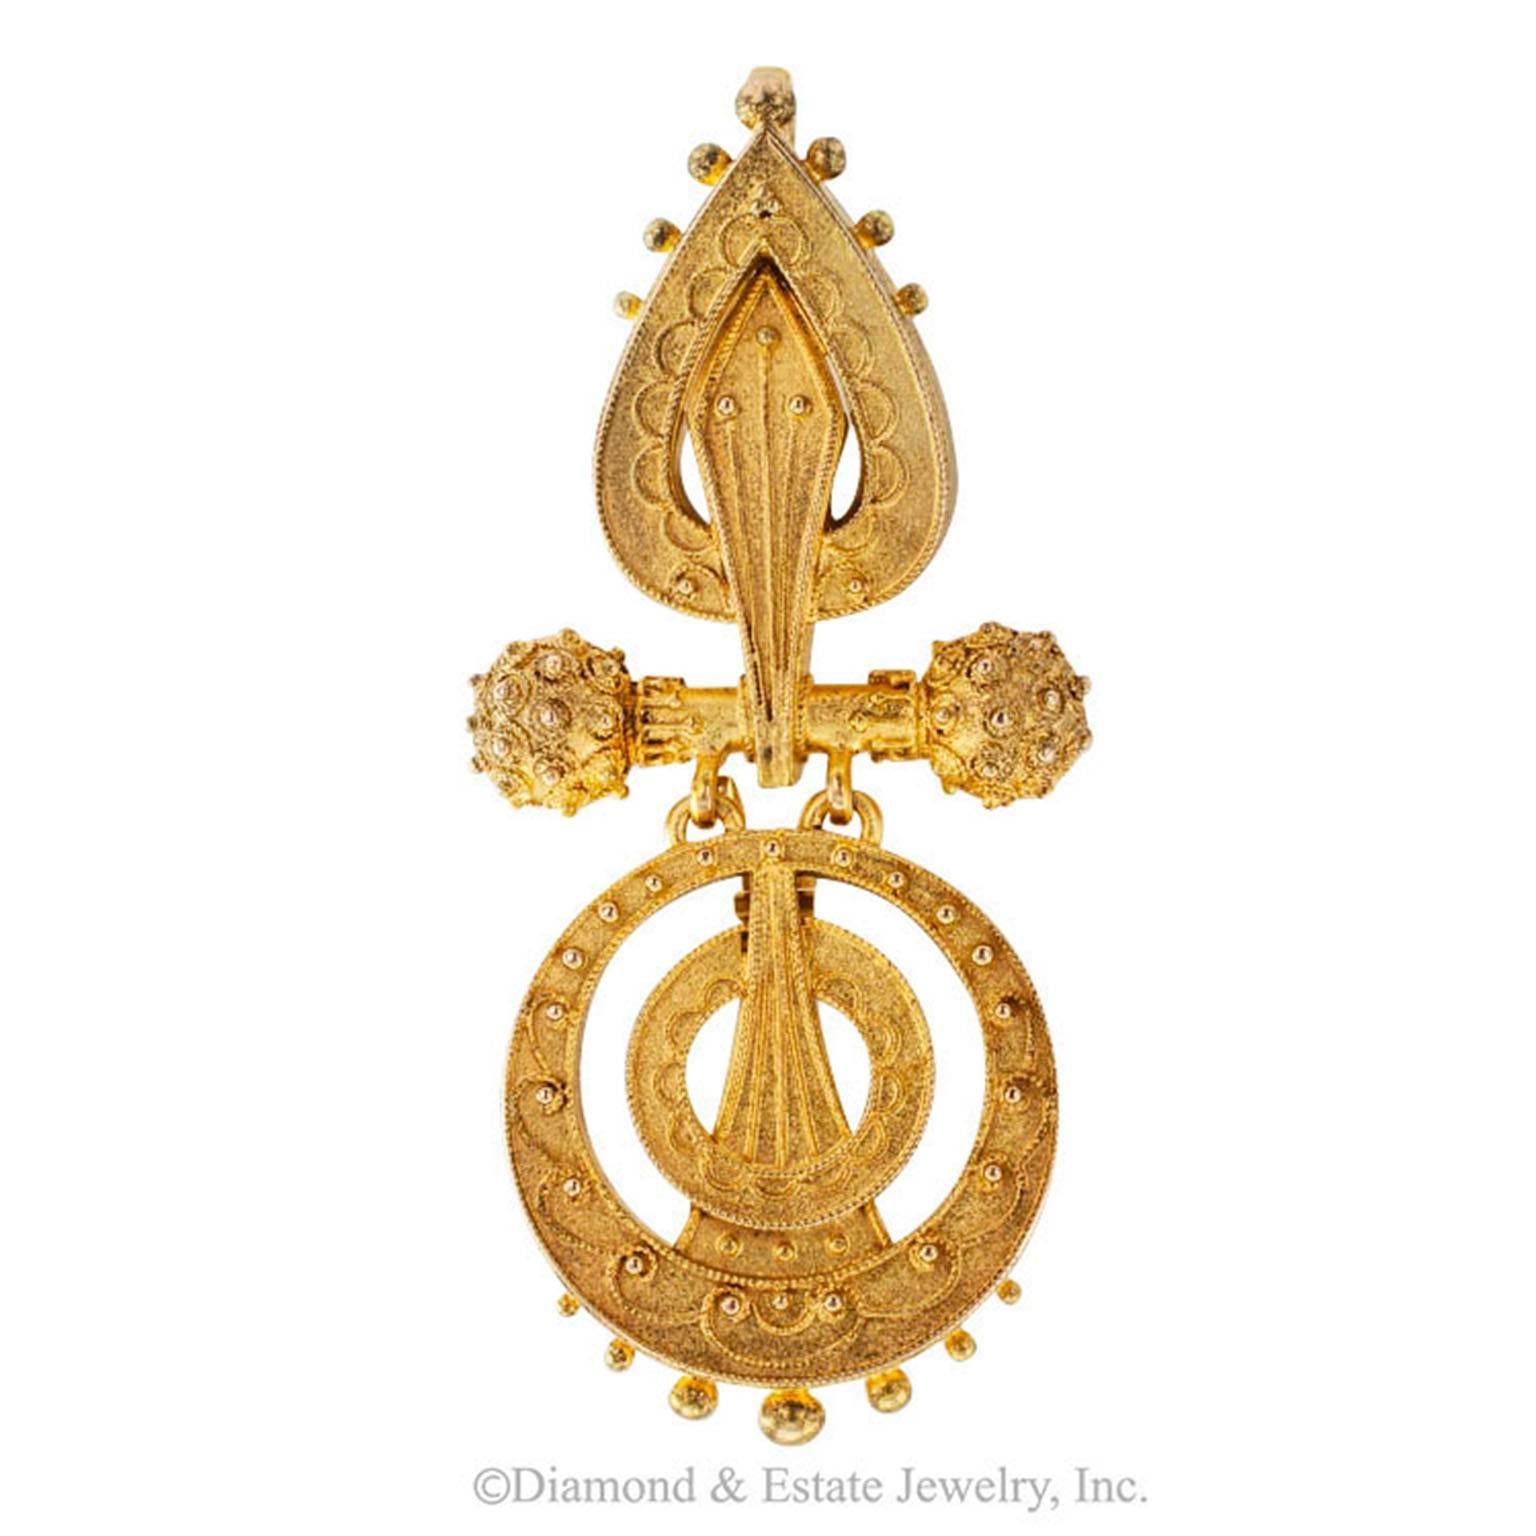 1880's George C Shreve & Co Articulated Brooch/Pendant

Objects such as this jewel are imbued with a romance that few other possessions can match.  Being in their presence is always a pleasure.  Collectors know the feeling and this exceptional